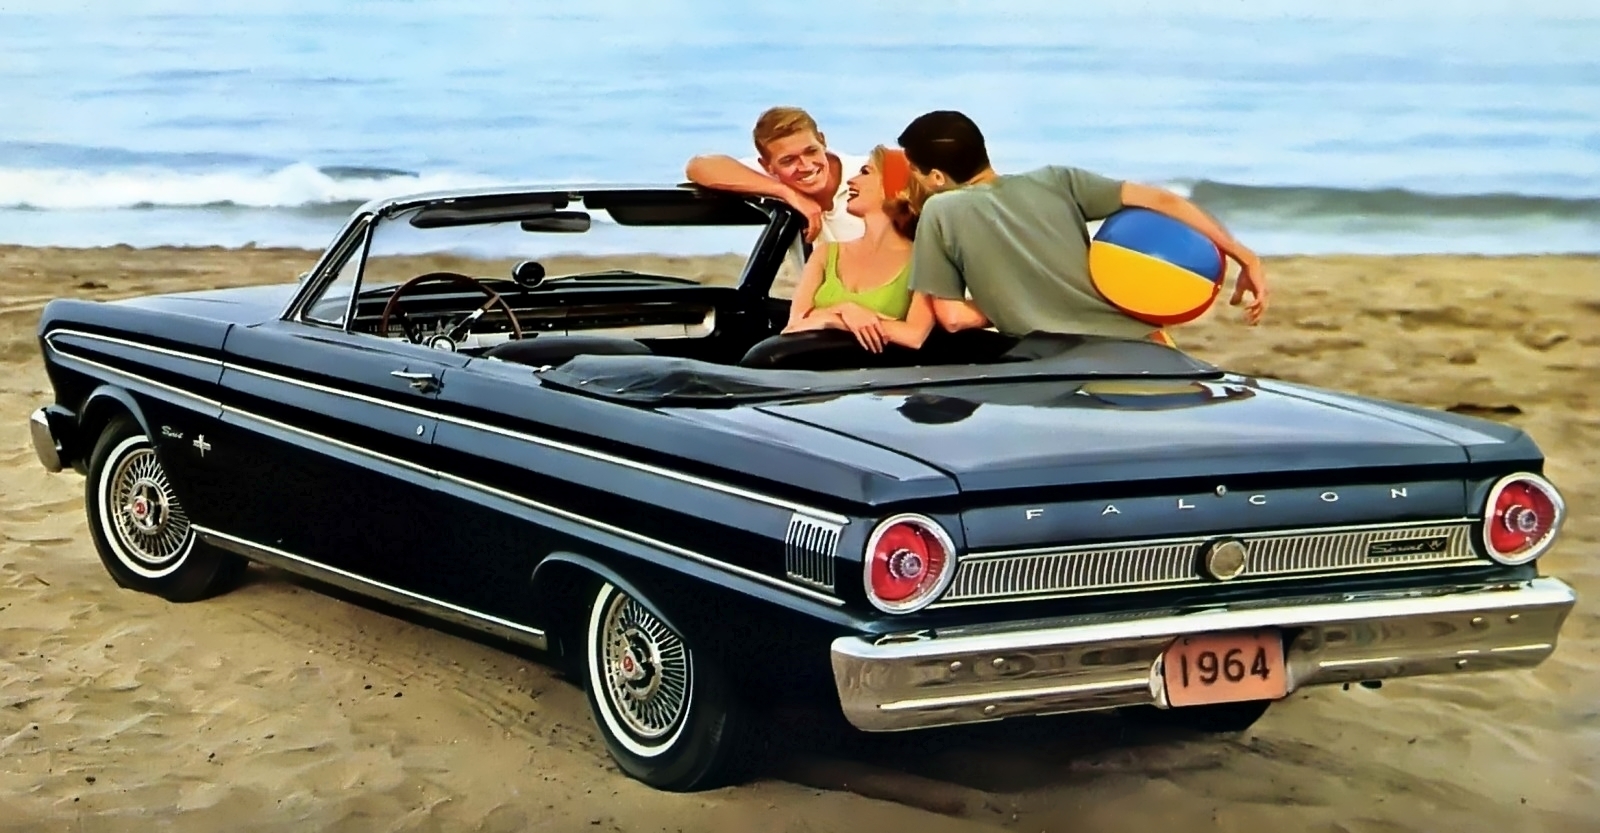 1964 Ford Falcon advertising